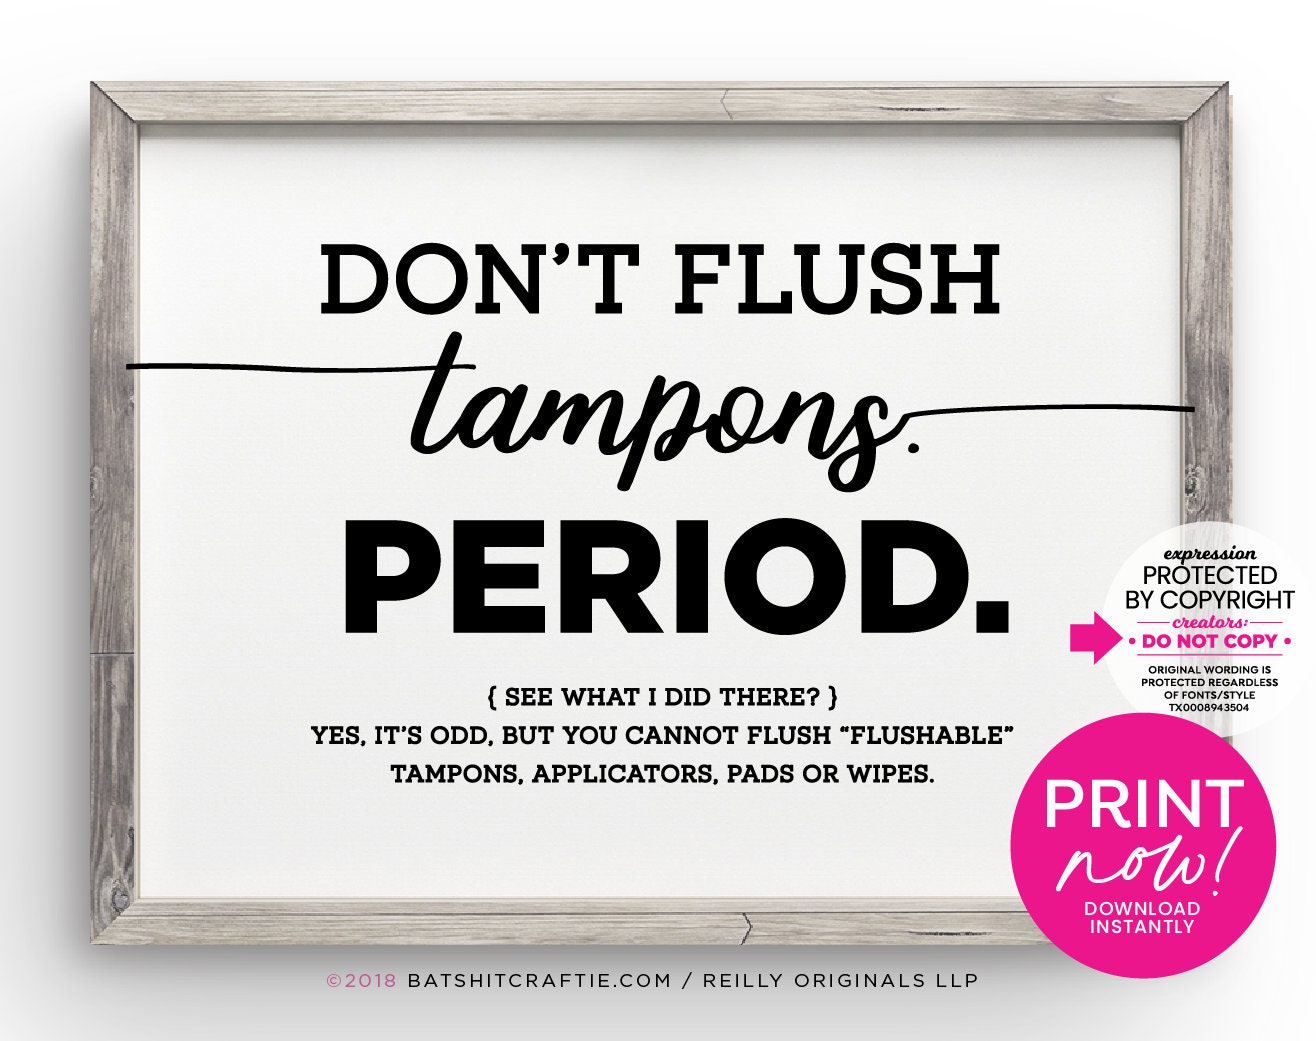 Can You Flush Tampons Down The Toilet?